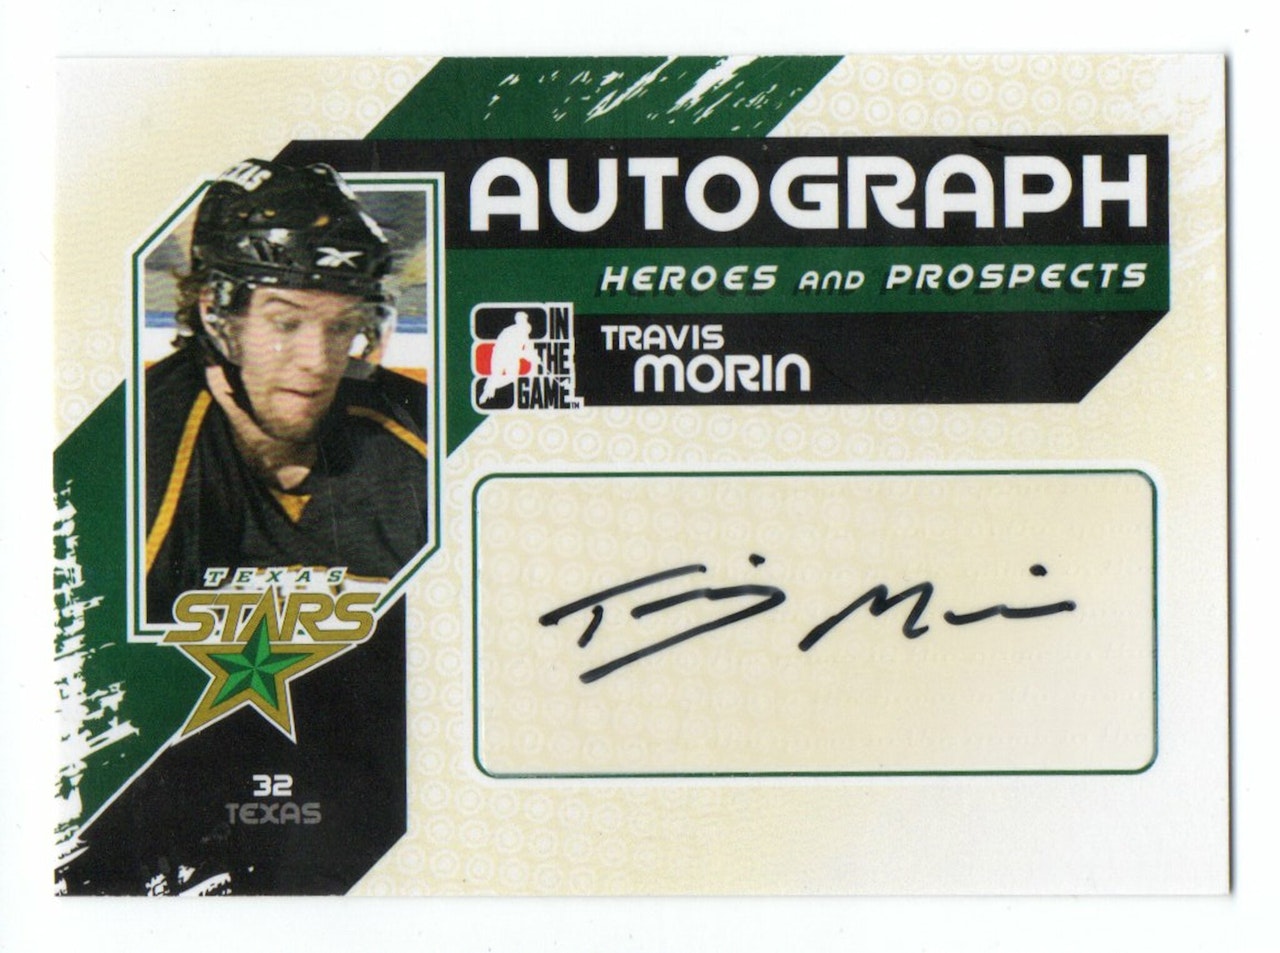 2010-11 ITG Heroes and Prospects Autographs #ATM Travis Morin (30-193x2-OTHERS)